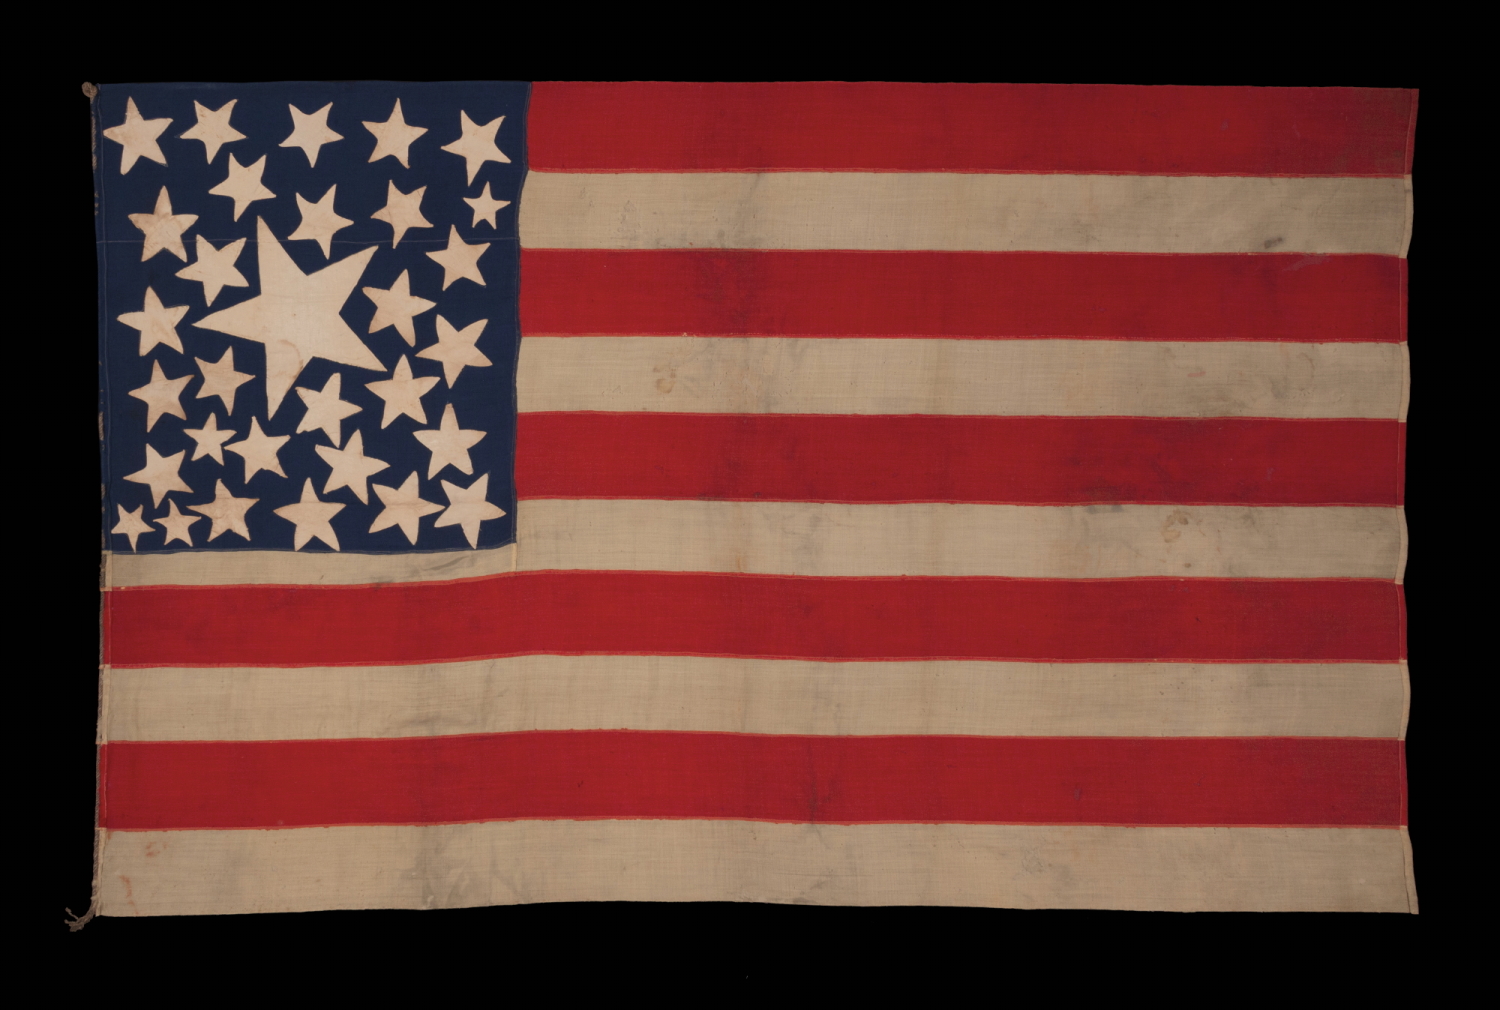 31 STARS ON AN EXTRAORDINARY ANTIQUE AMERICAN FLAG WITH A RANDOM CONSTELLATION, IN VARIOUS SHAPES AND SIZES, CLUSTERED ABOUT AN ENORMOUS CENTER STAR, WITH A COMPLIMENT OF 10 STRIPES; A MASTERPIECE OF EARLY AMERICAN FLAG-MAKING, CALIFORNIA STATEHOOD, 1850-1858